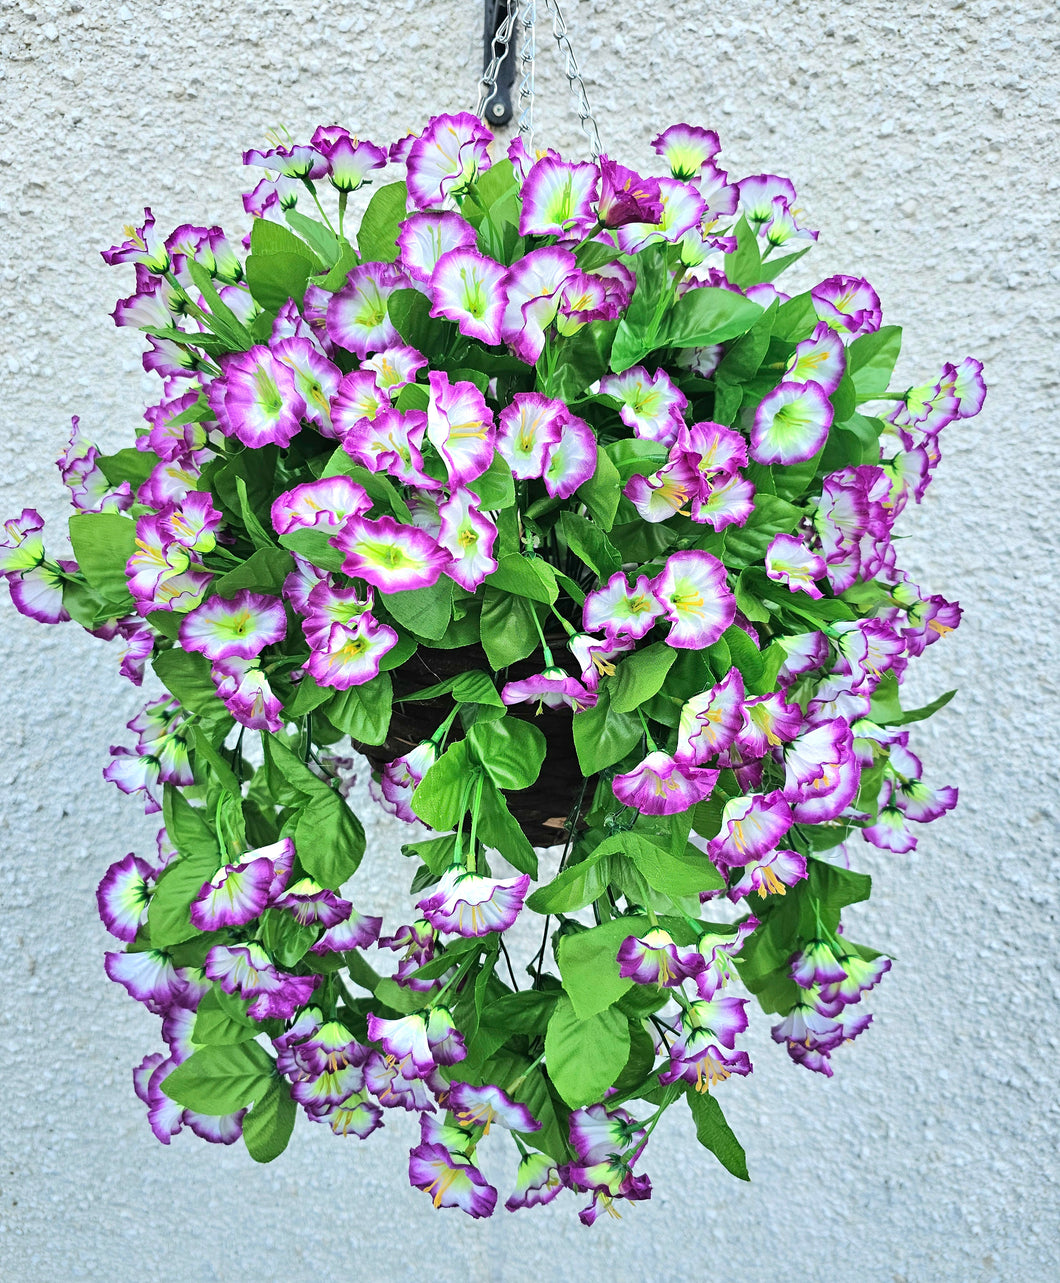 Artificial Morning Glory Hanging Basket Lilac and White Garden Decor